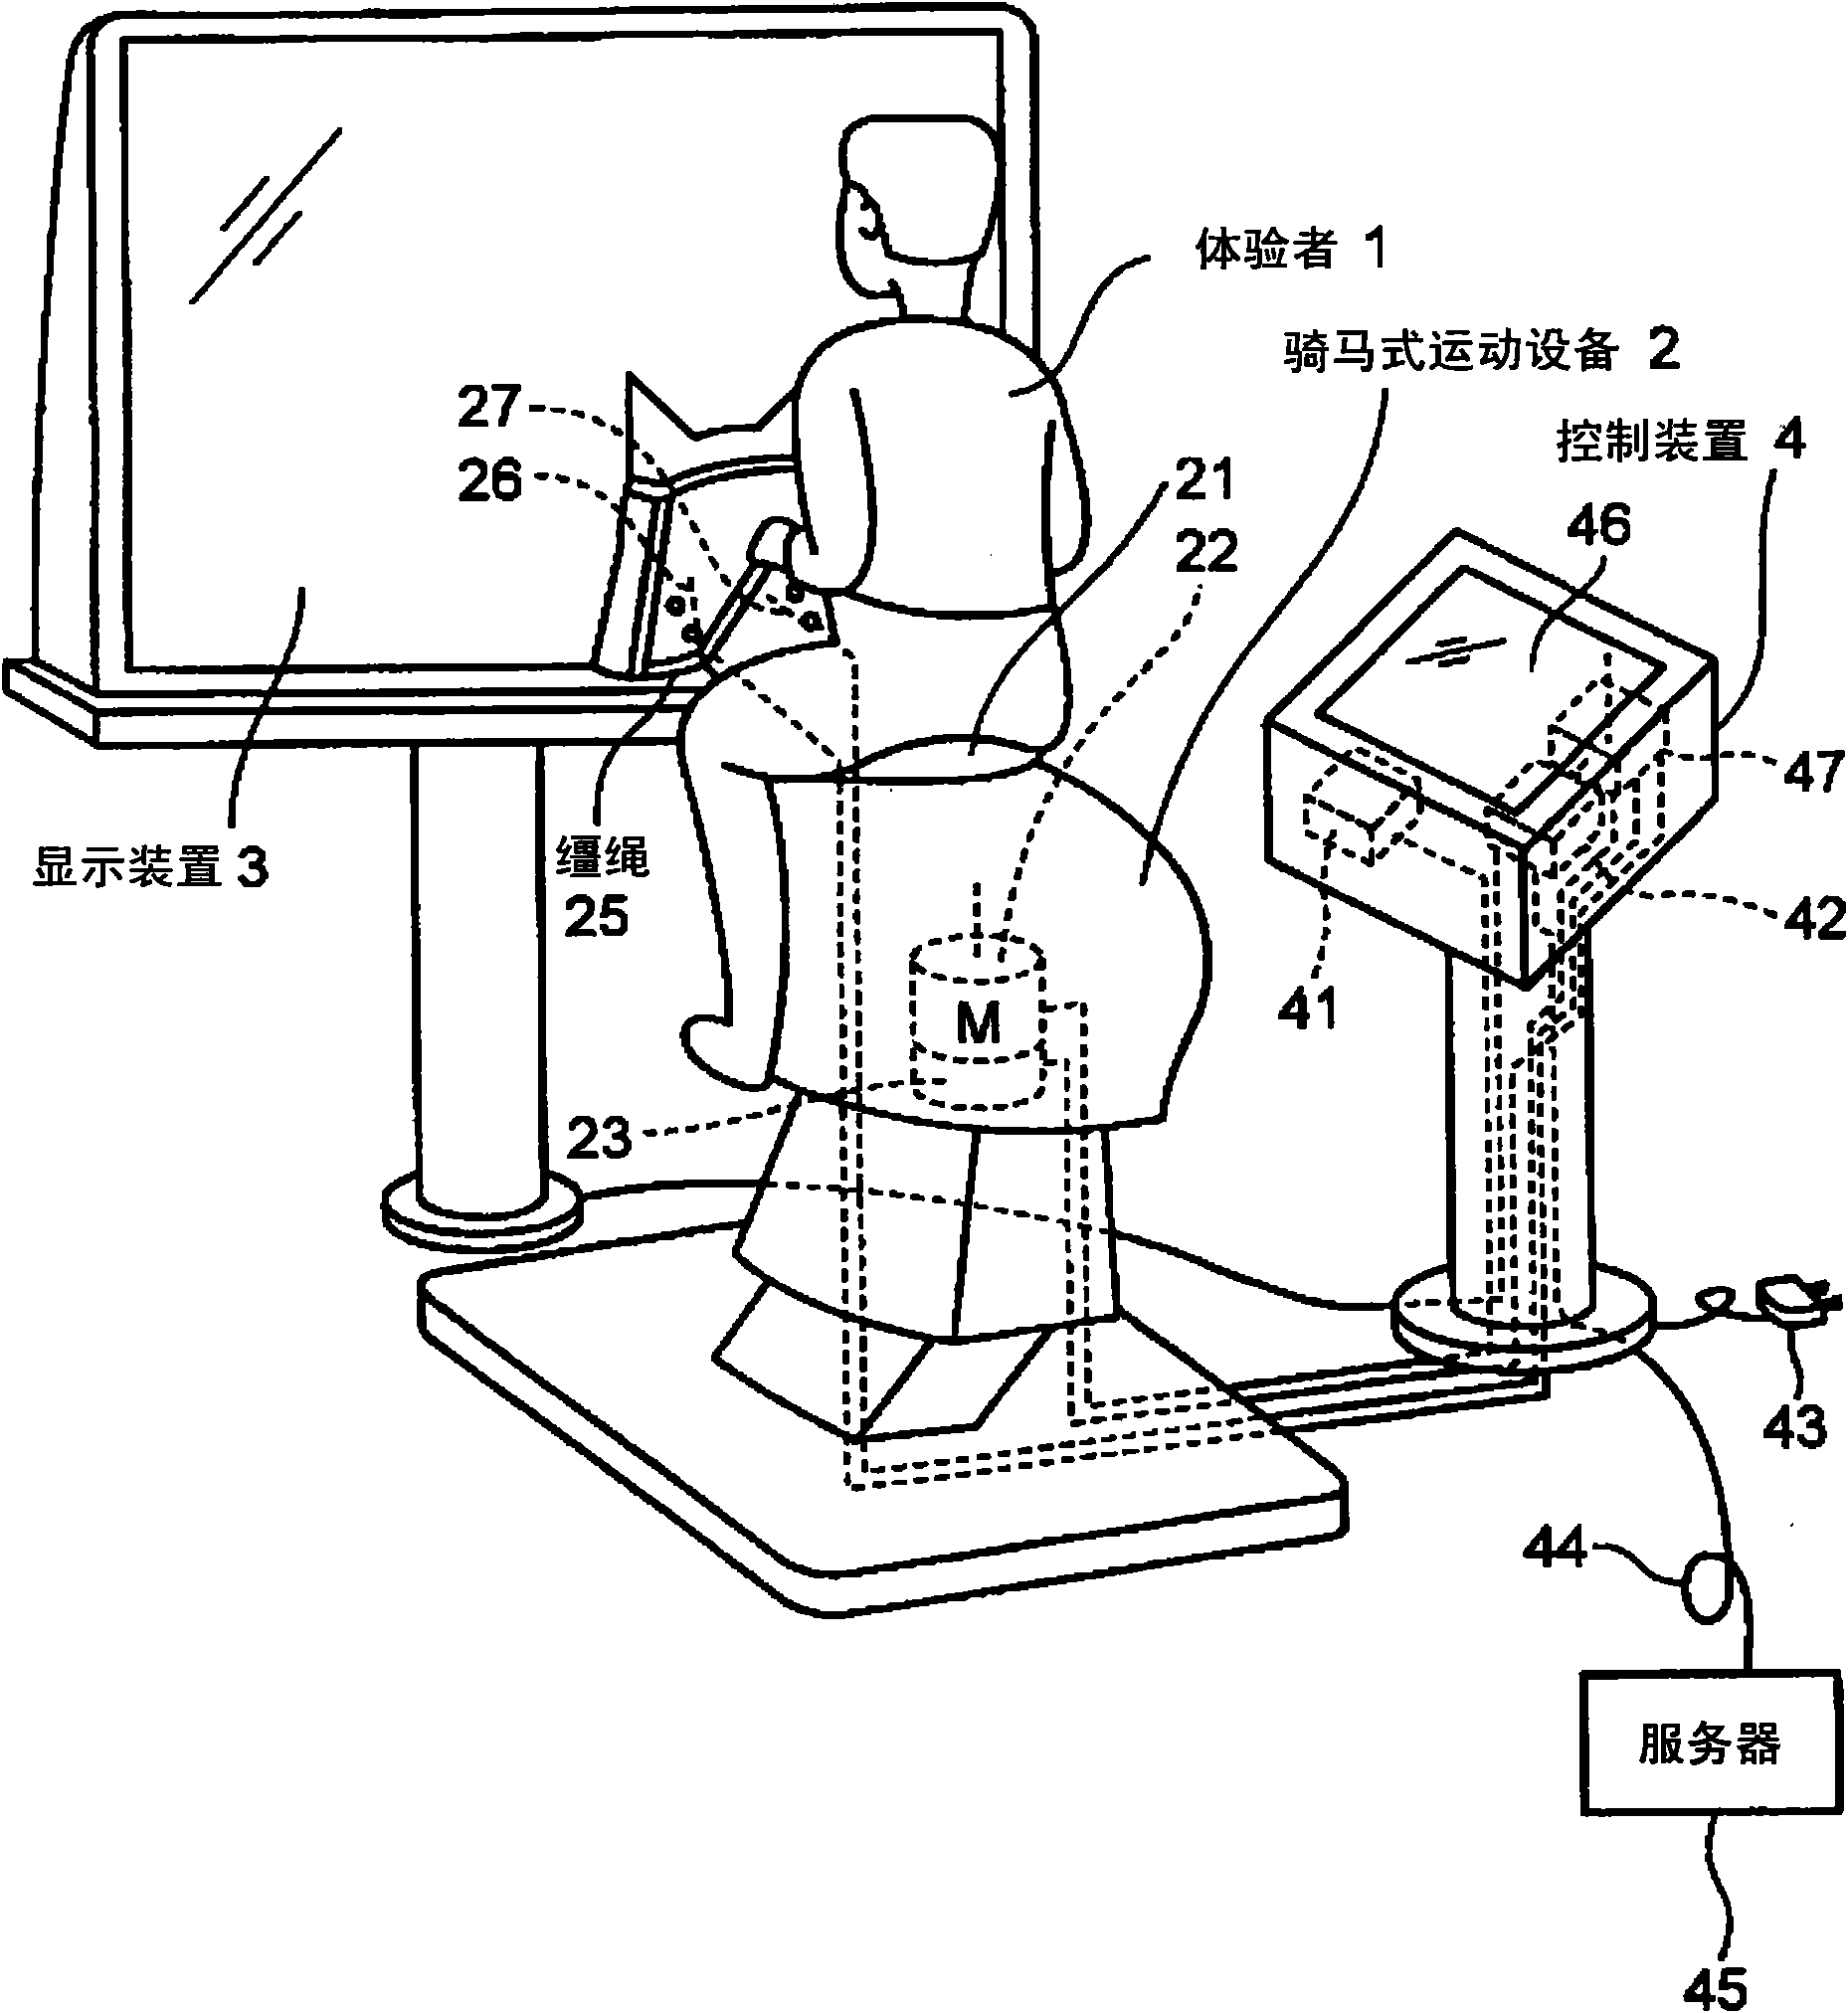 Exercising system with display function